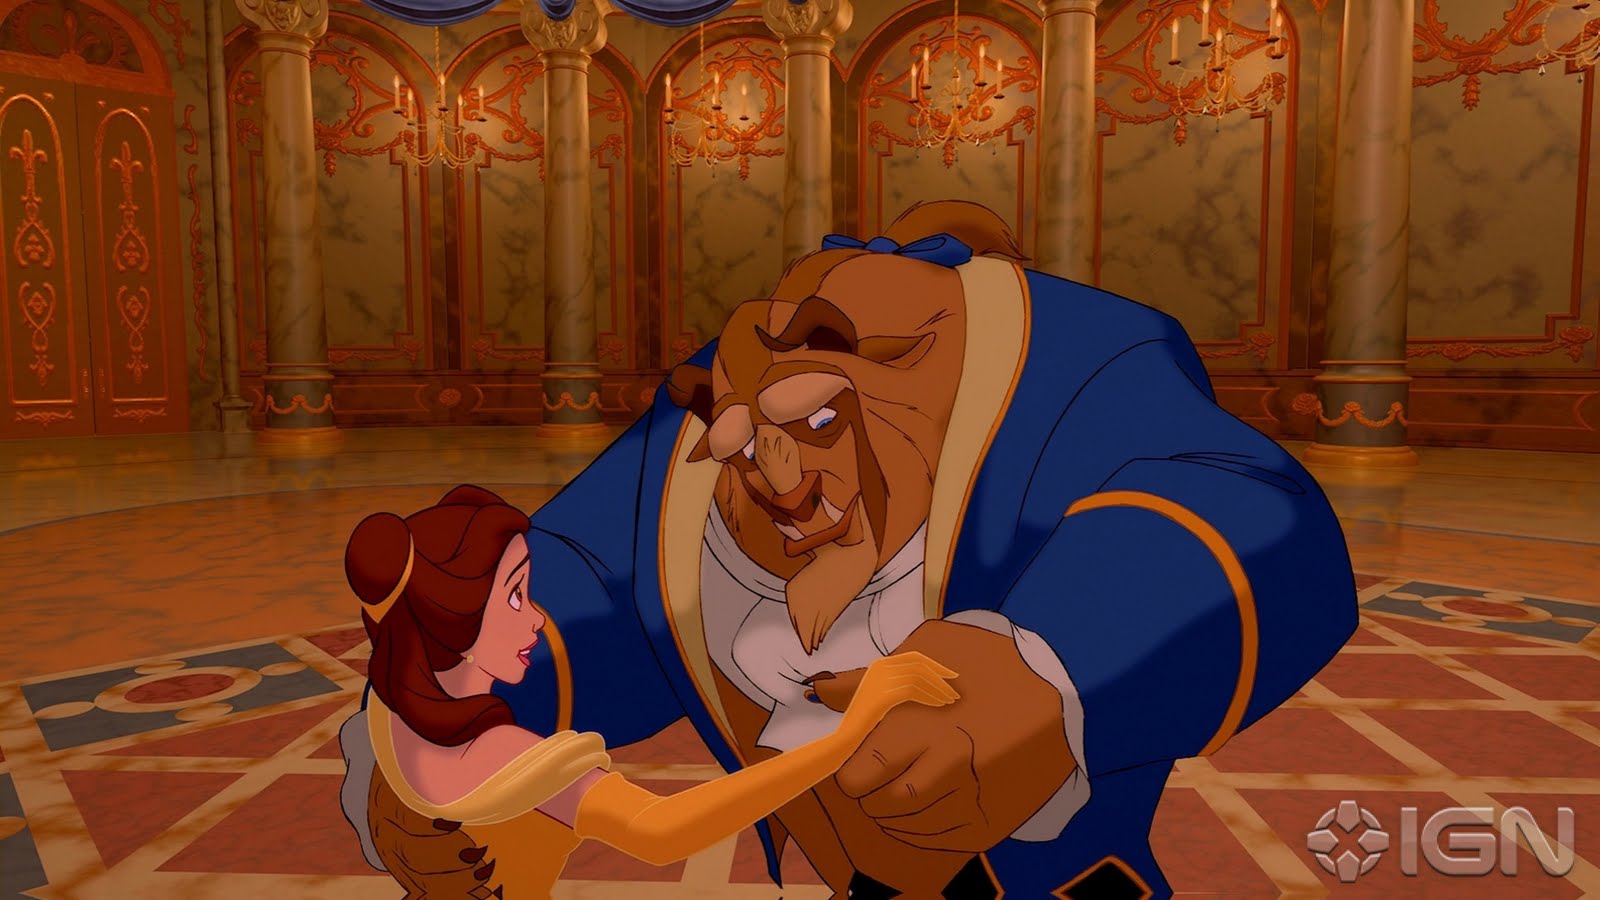 Where Is Wallpaper: beauty and the beast wallpaper hd